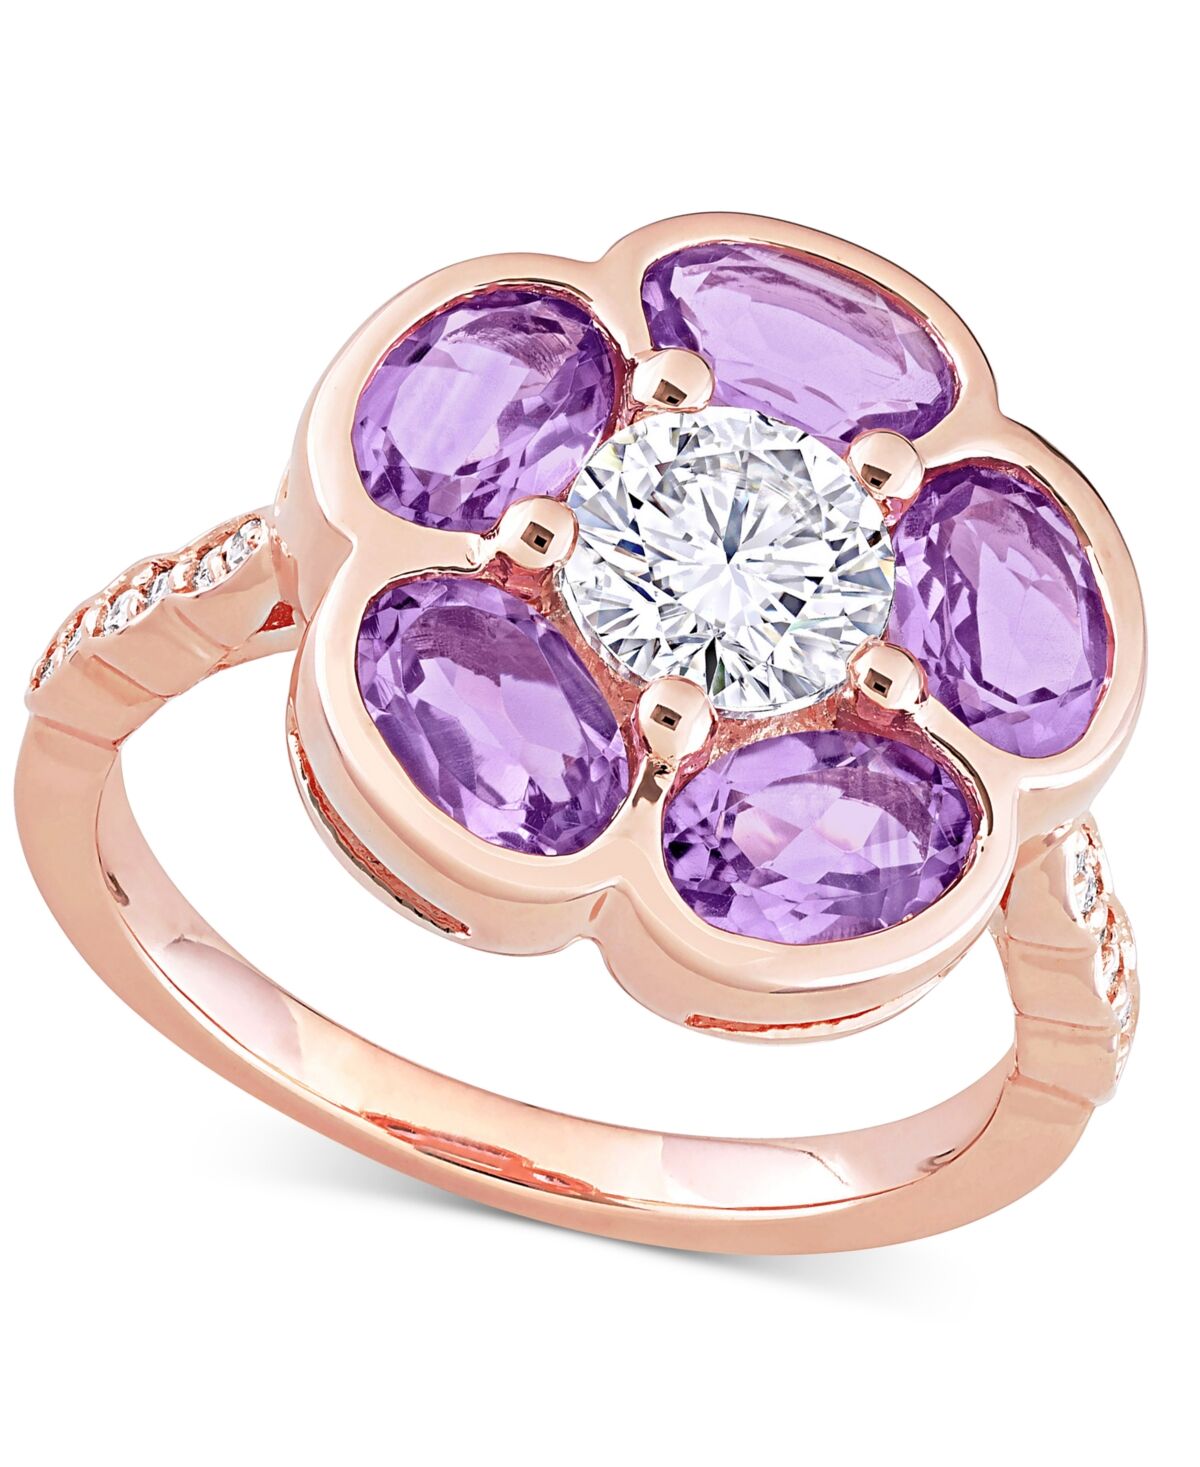 Macy's Amethyst (2 ct. t.w.) & White Topaz (1 ct. t.w.) Flower Ring in Rose Gold-Plated Sterling Silver - Amethyst